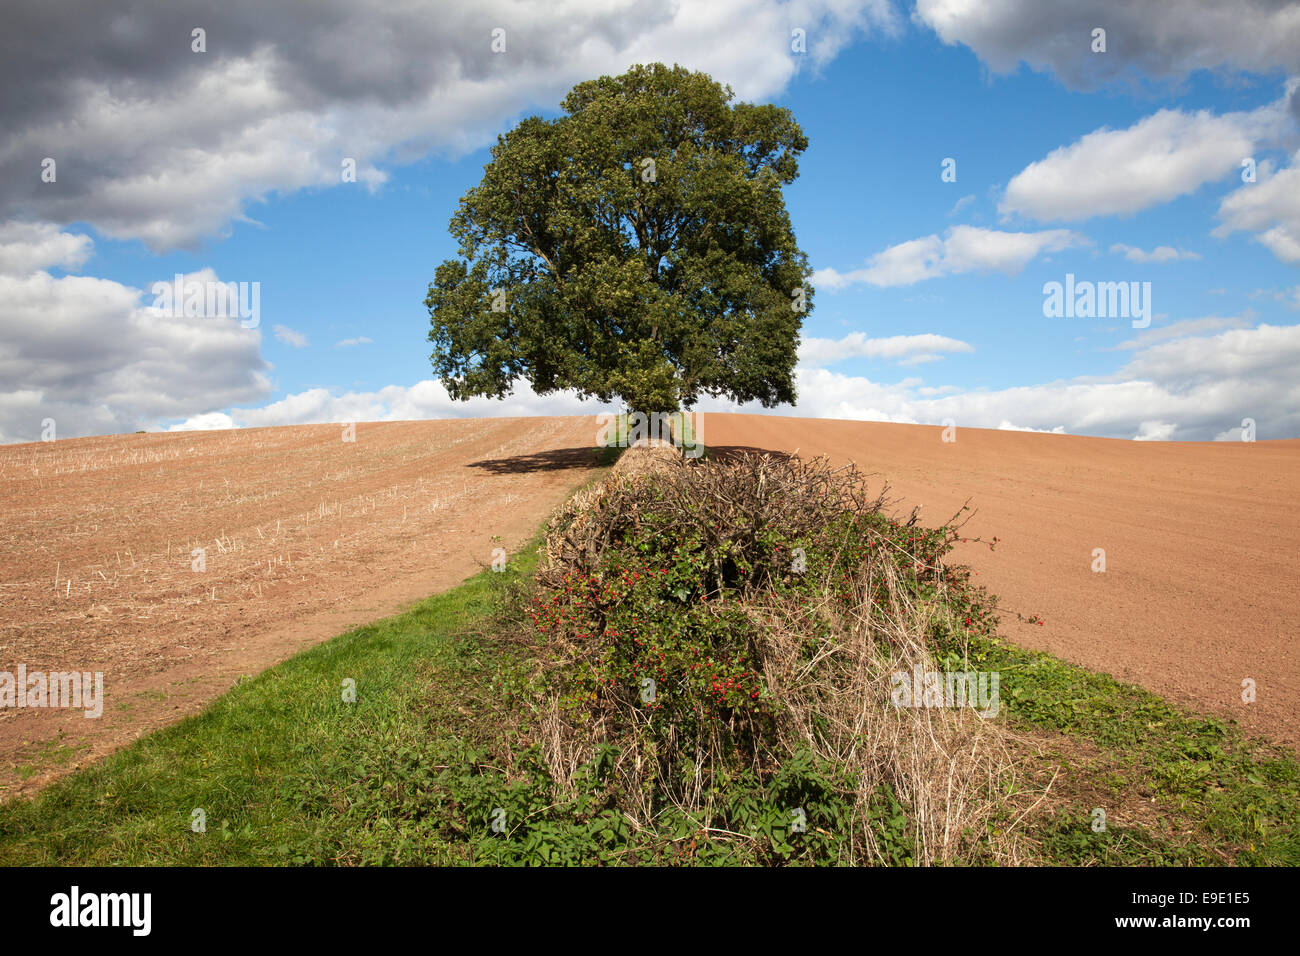 A hedgerow between fields on a farm in the U.K. Stock Photo